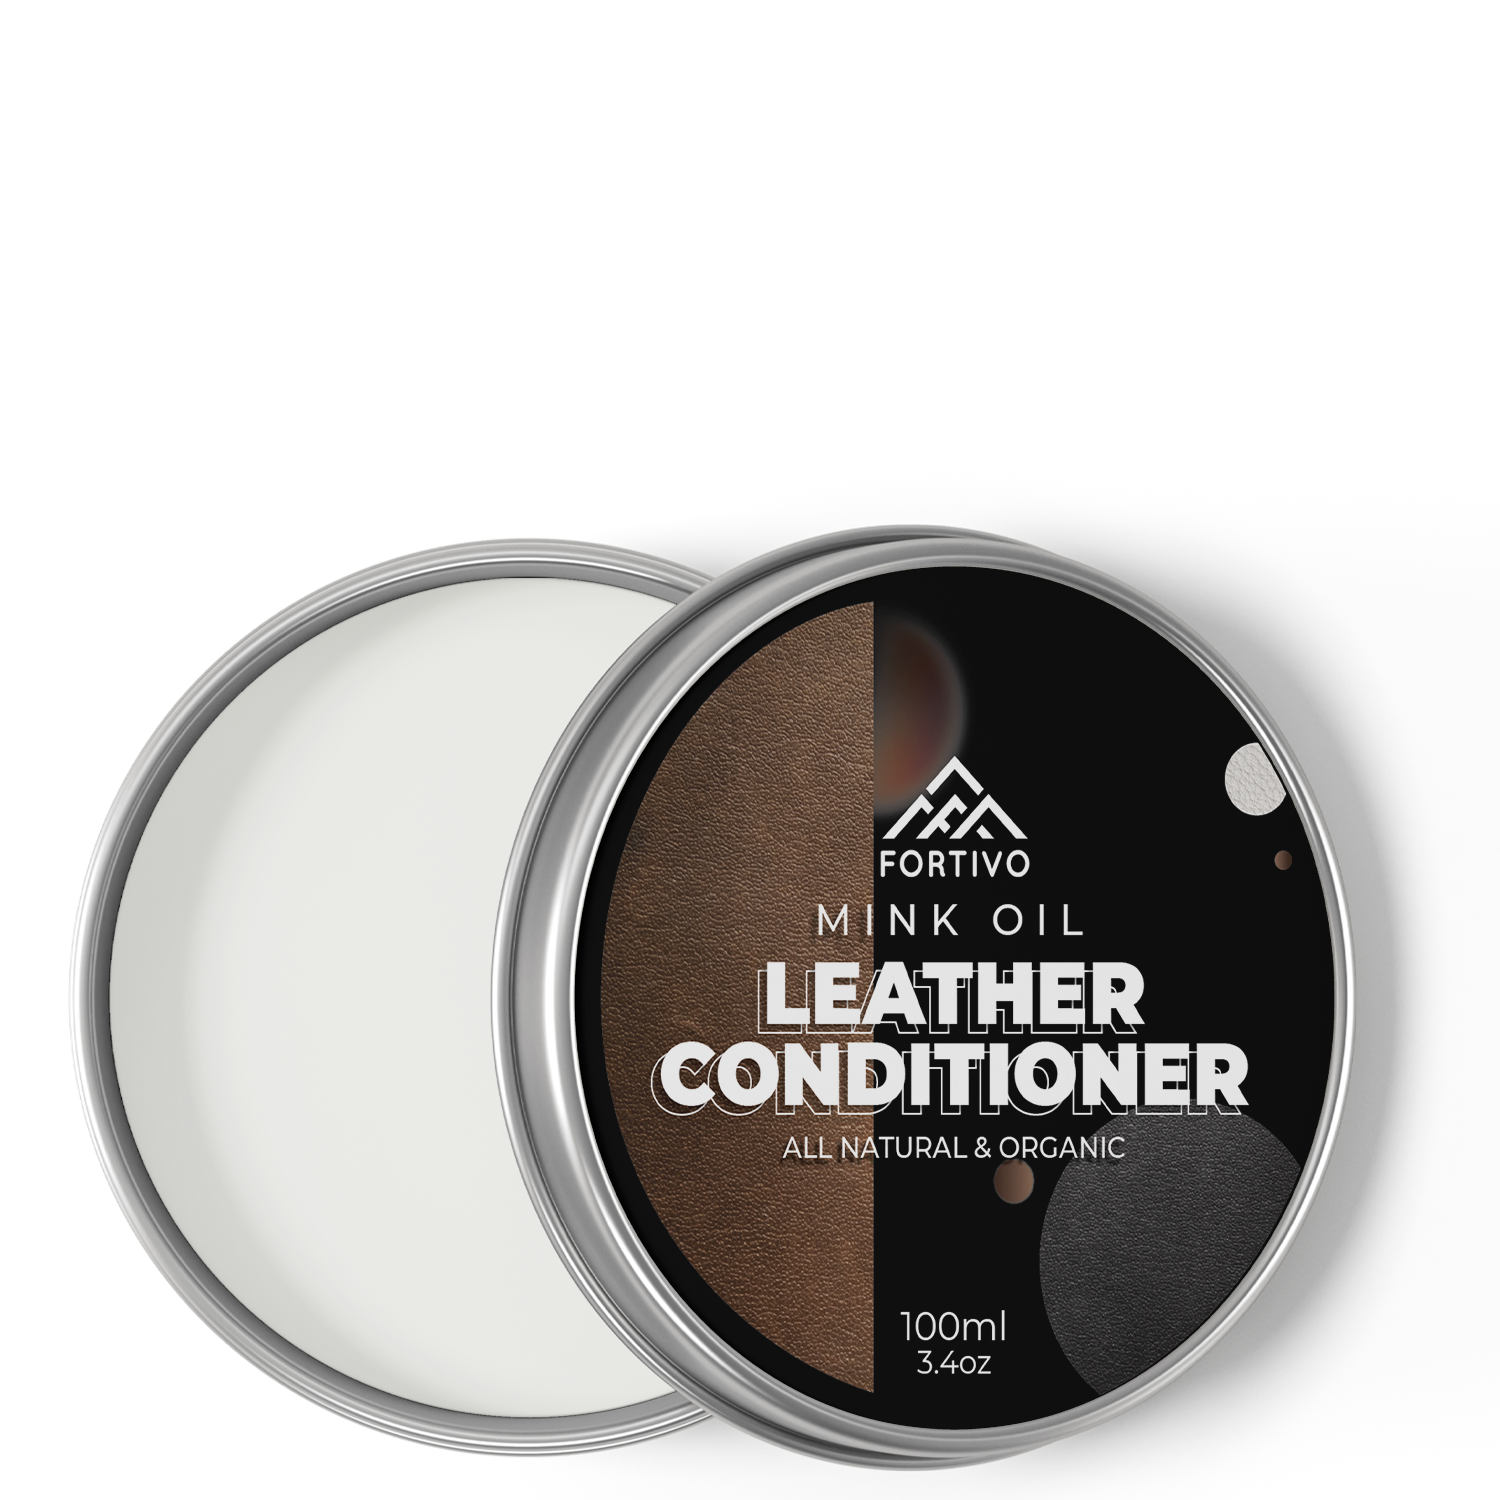 Leather Recoloring Balm with Mink Oil for Leather Furniture Dark Gray